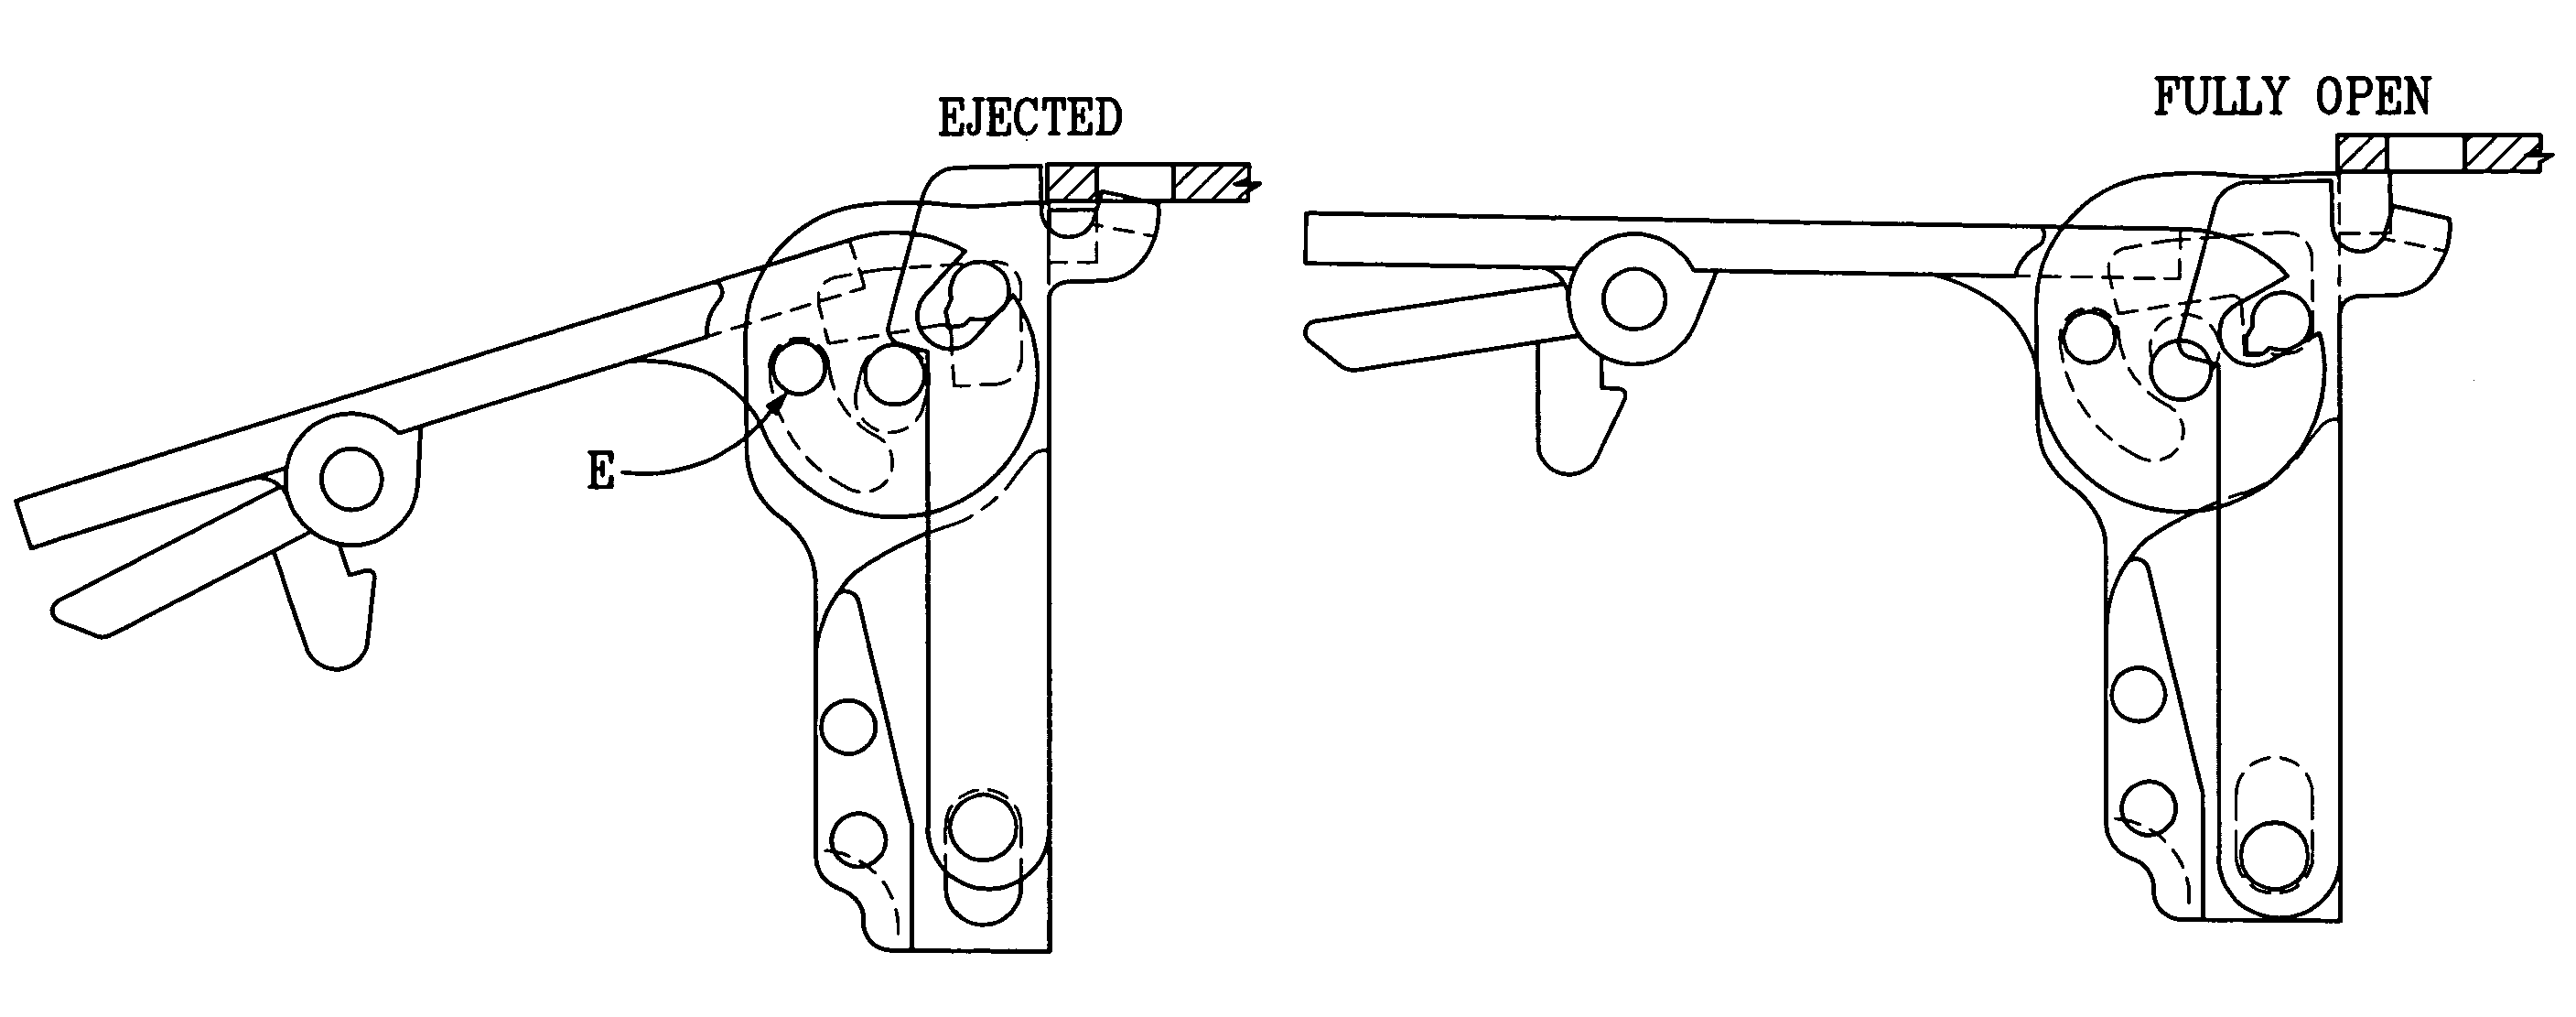 Compact PCI ejector latch